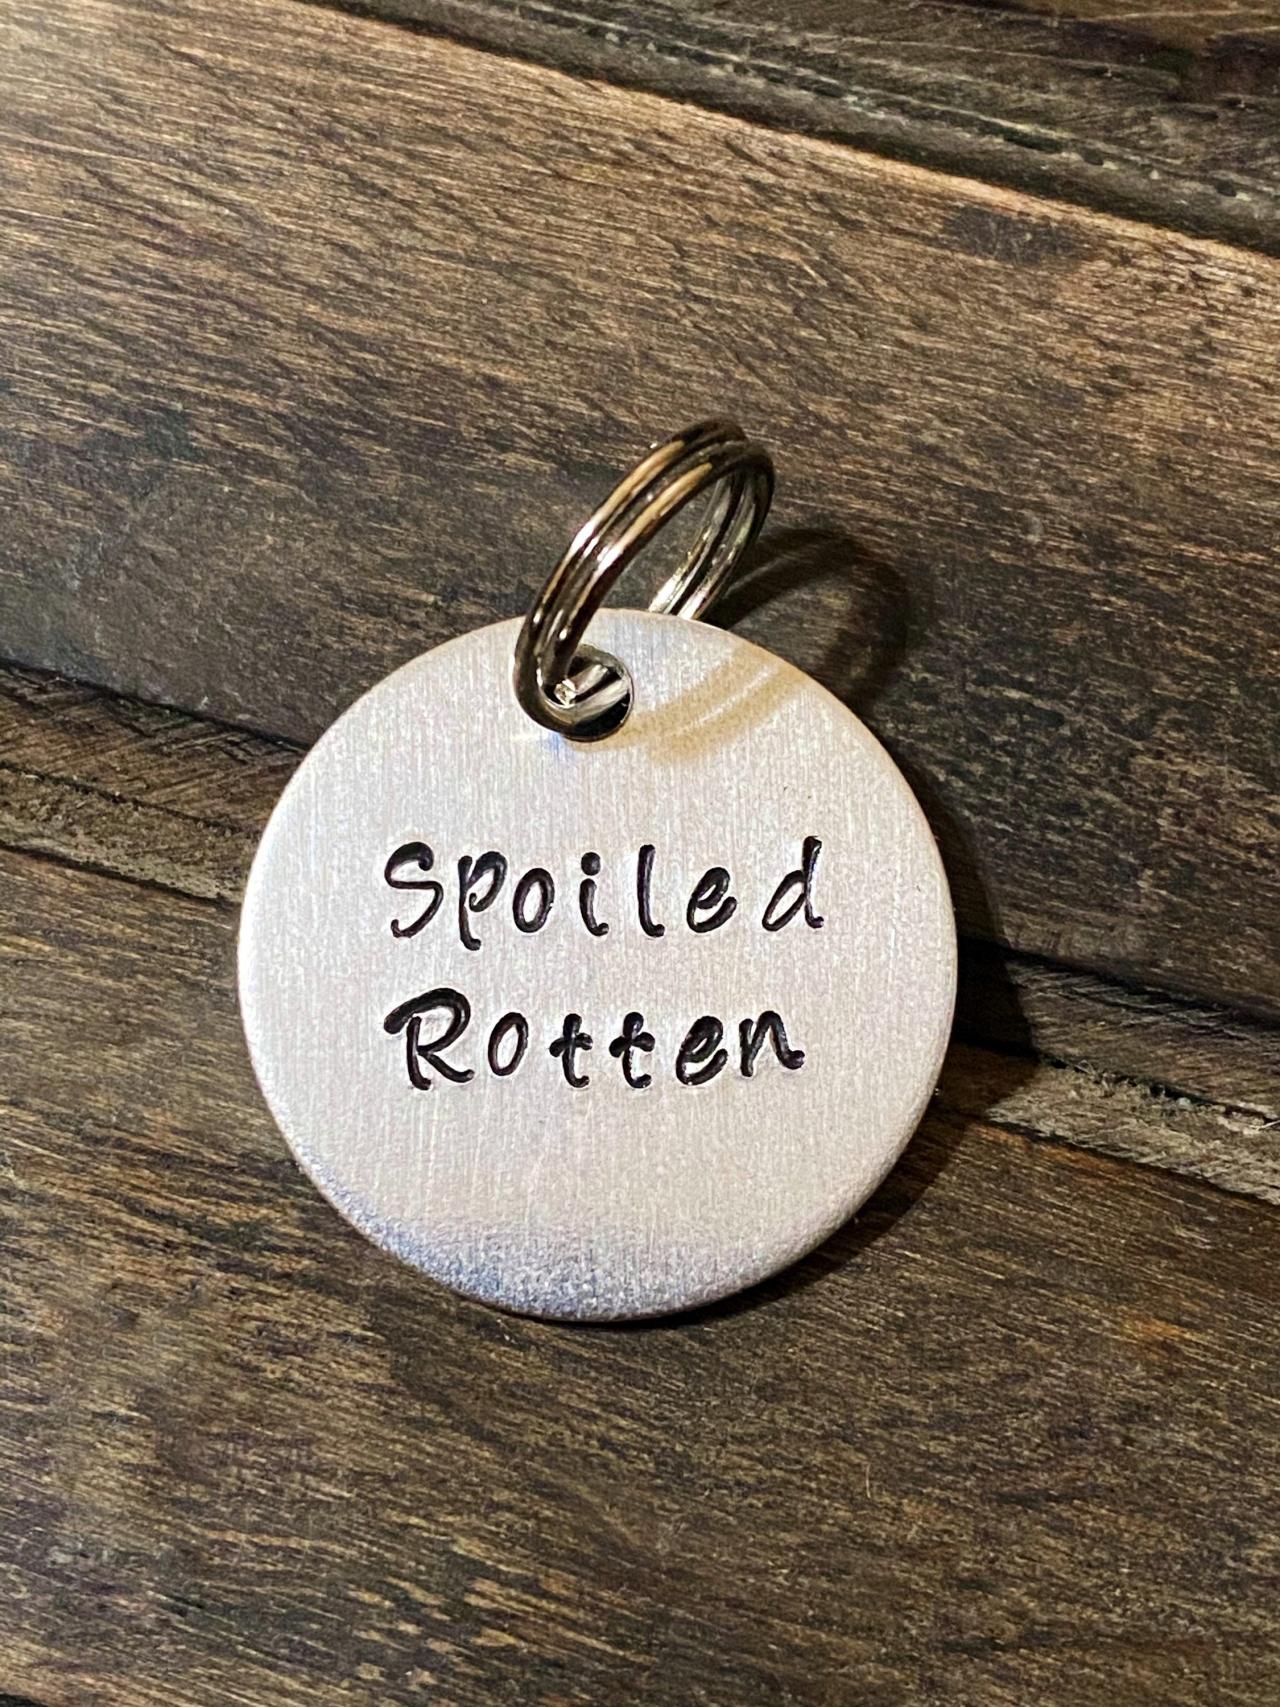 DOG OR CAT tag, “Spoiled Rotten” tag, Hand Stamped, Collar tag; Fun tag